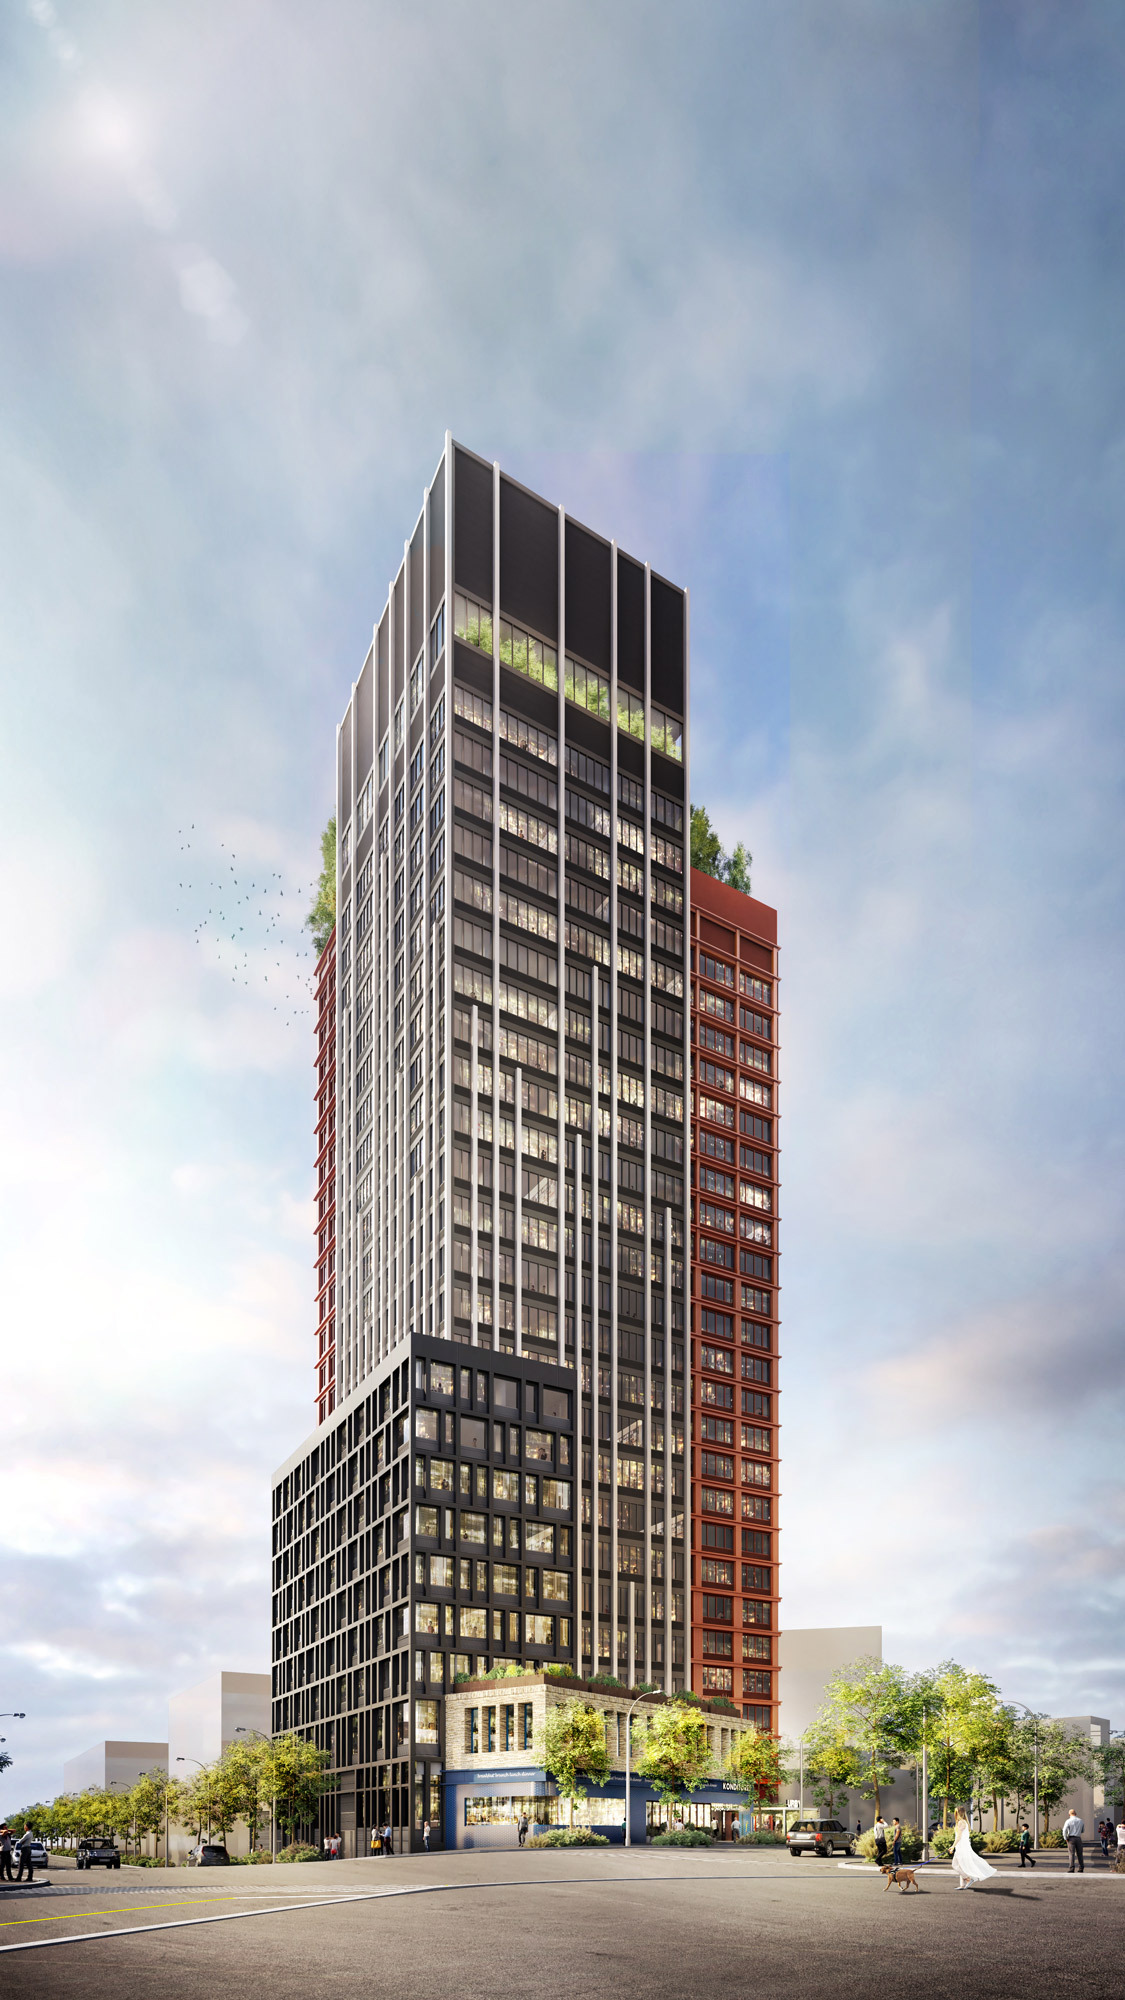 Modern high-rise rendering with a multi-texture facade, featuring contrasting sections of reflective glass, red brick, and charcoal panels. The building showcases staggered terraces with greenery, enhancing urban sustainability.